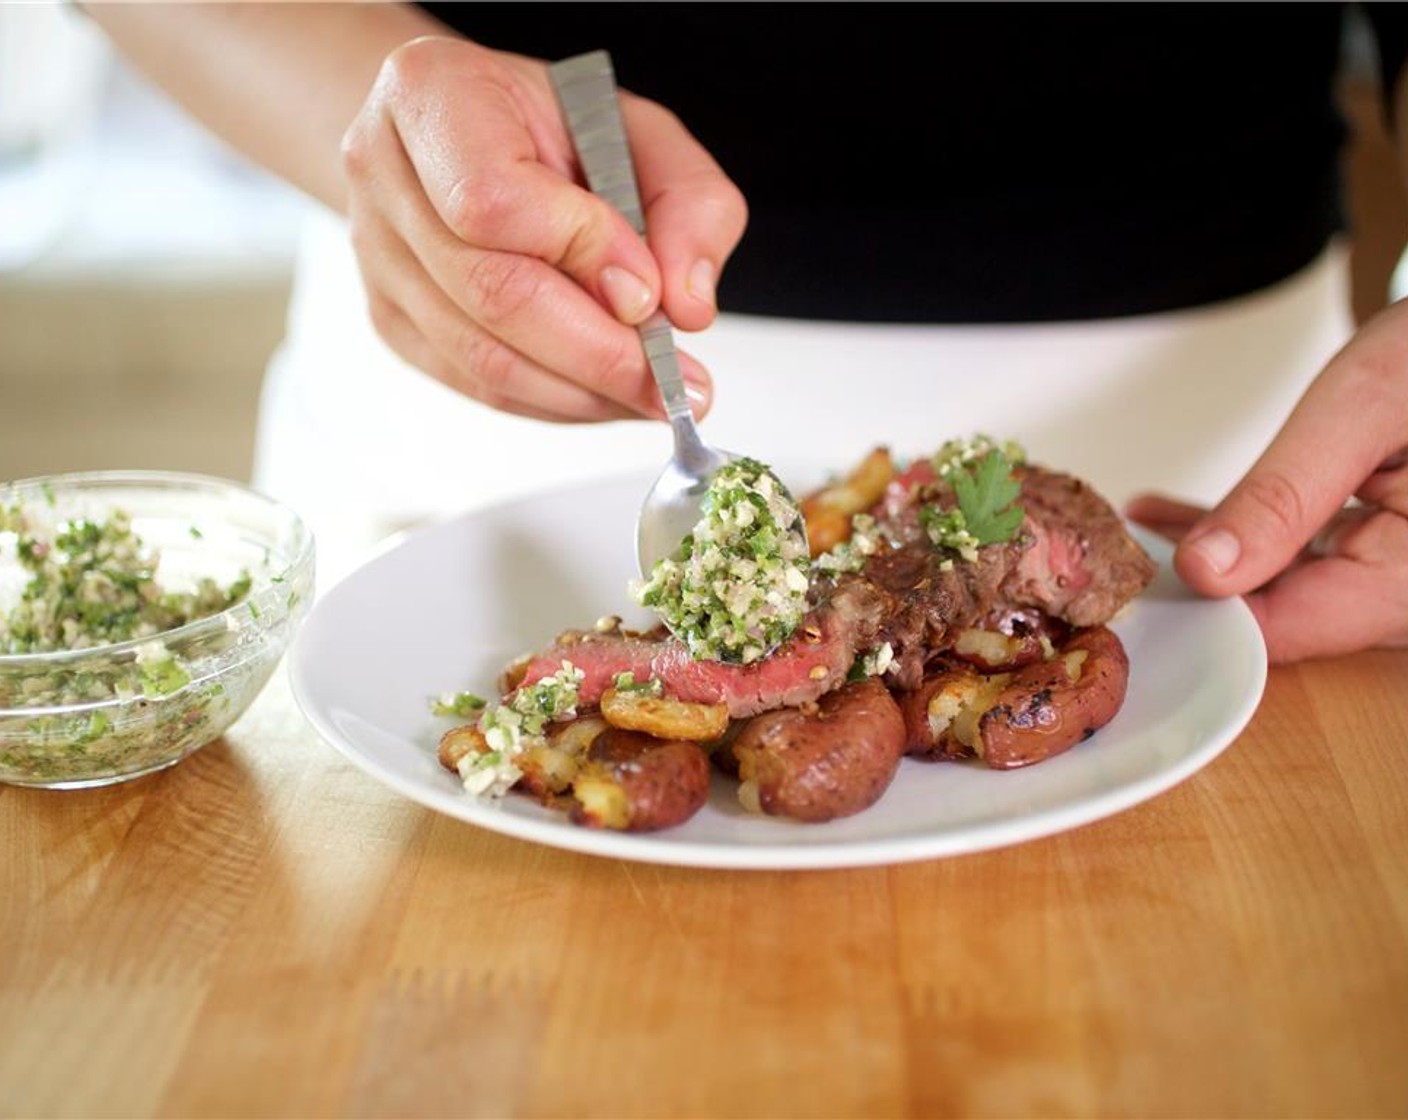 step 10 Cut the steak into 1/4 inch thick slices. Place the potatoes and garlic, down the center in a row between the two plates. Arrange the steak slices fanned over the top of the potatoes. Spoon the chimichurri on top. Garnish with the parsley leaves.